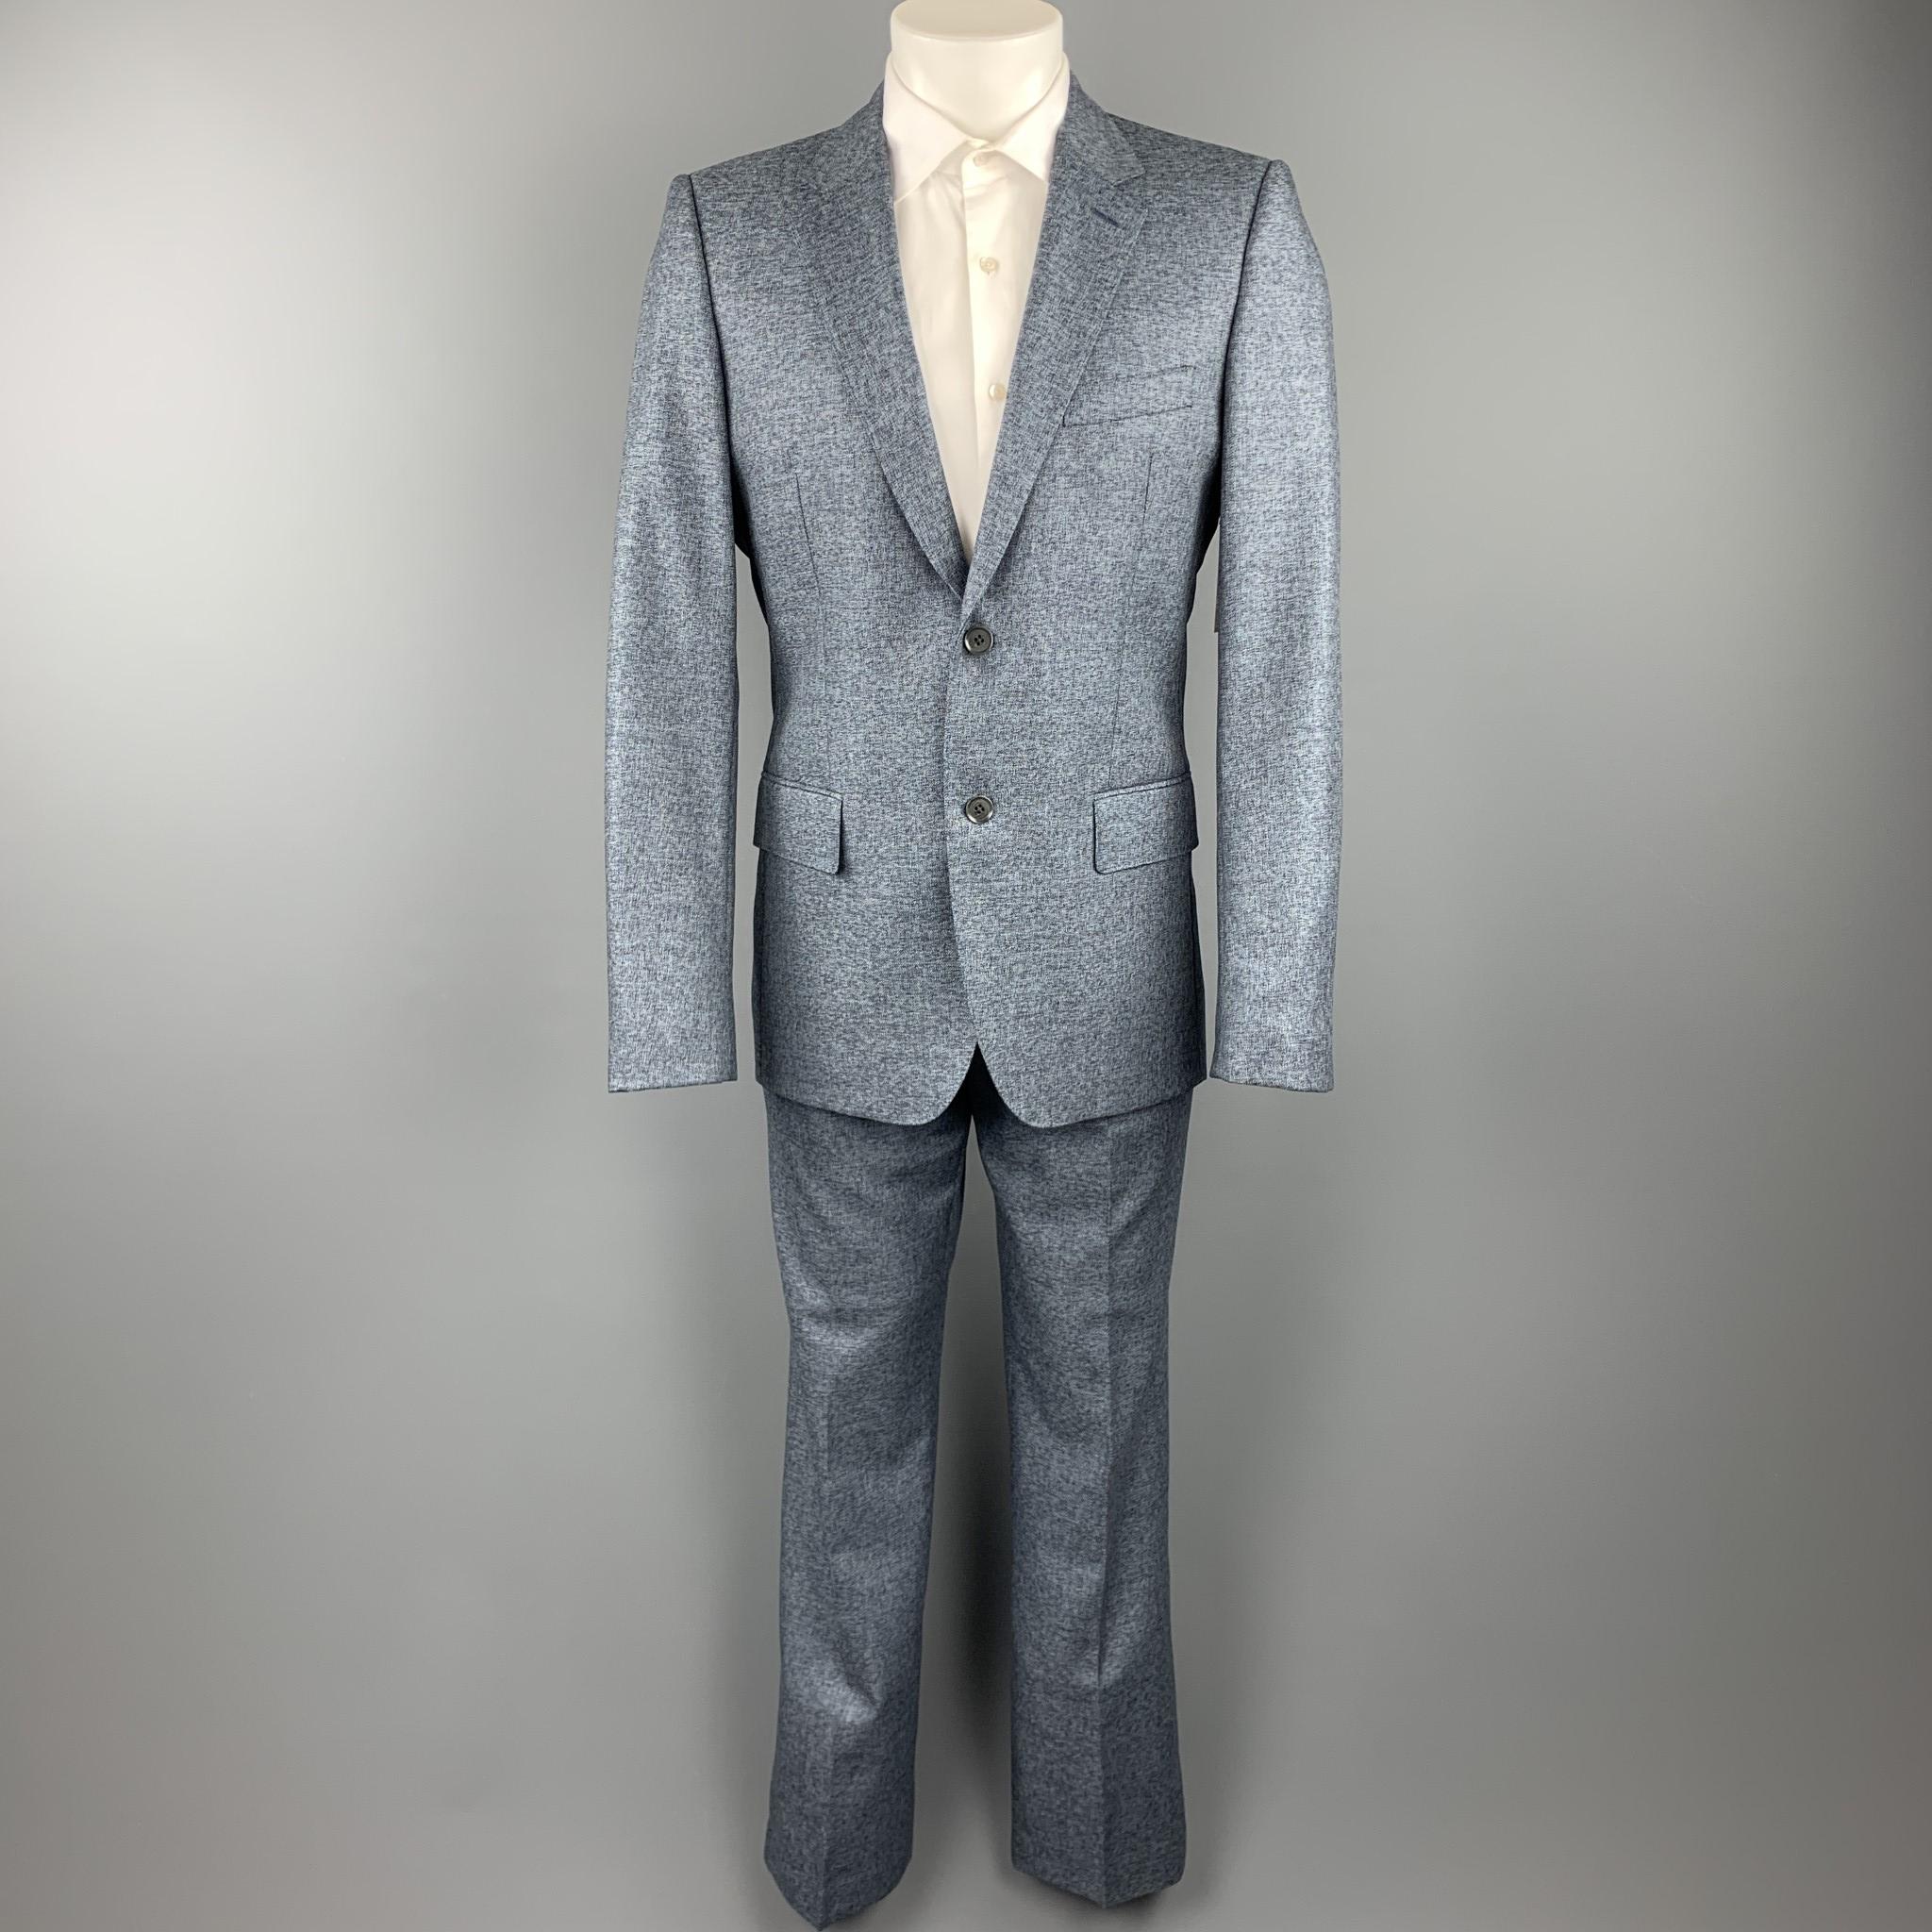 CALVIN KLEIN COLLECTION suit comes in a blue heather wool with a teal liner and includes a single breasted, two button sport coat with a notch lapel and matching flat front trousers. As-Is. Minor wear on the liner. 

Good Pre-Owned